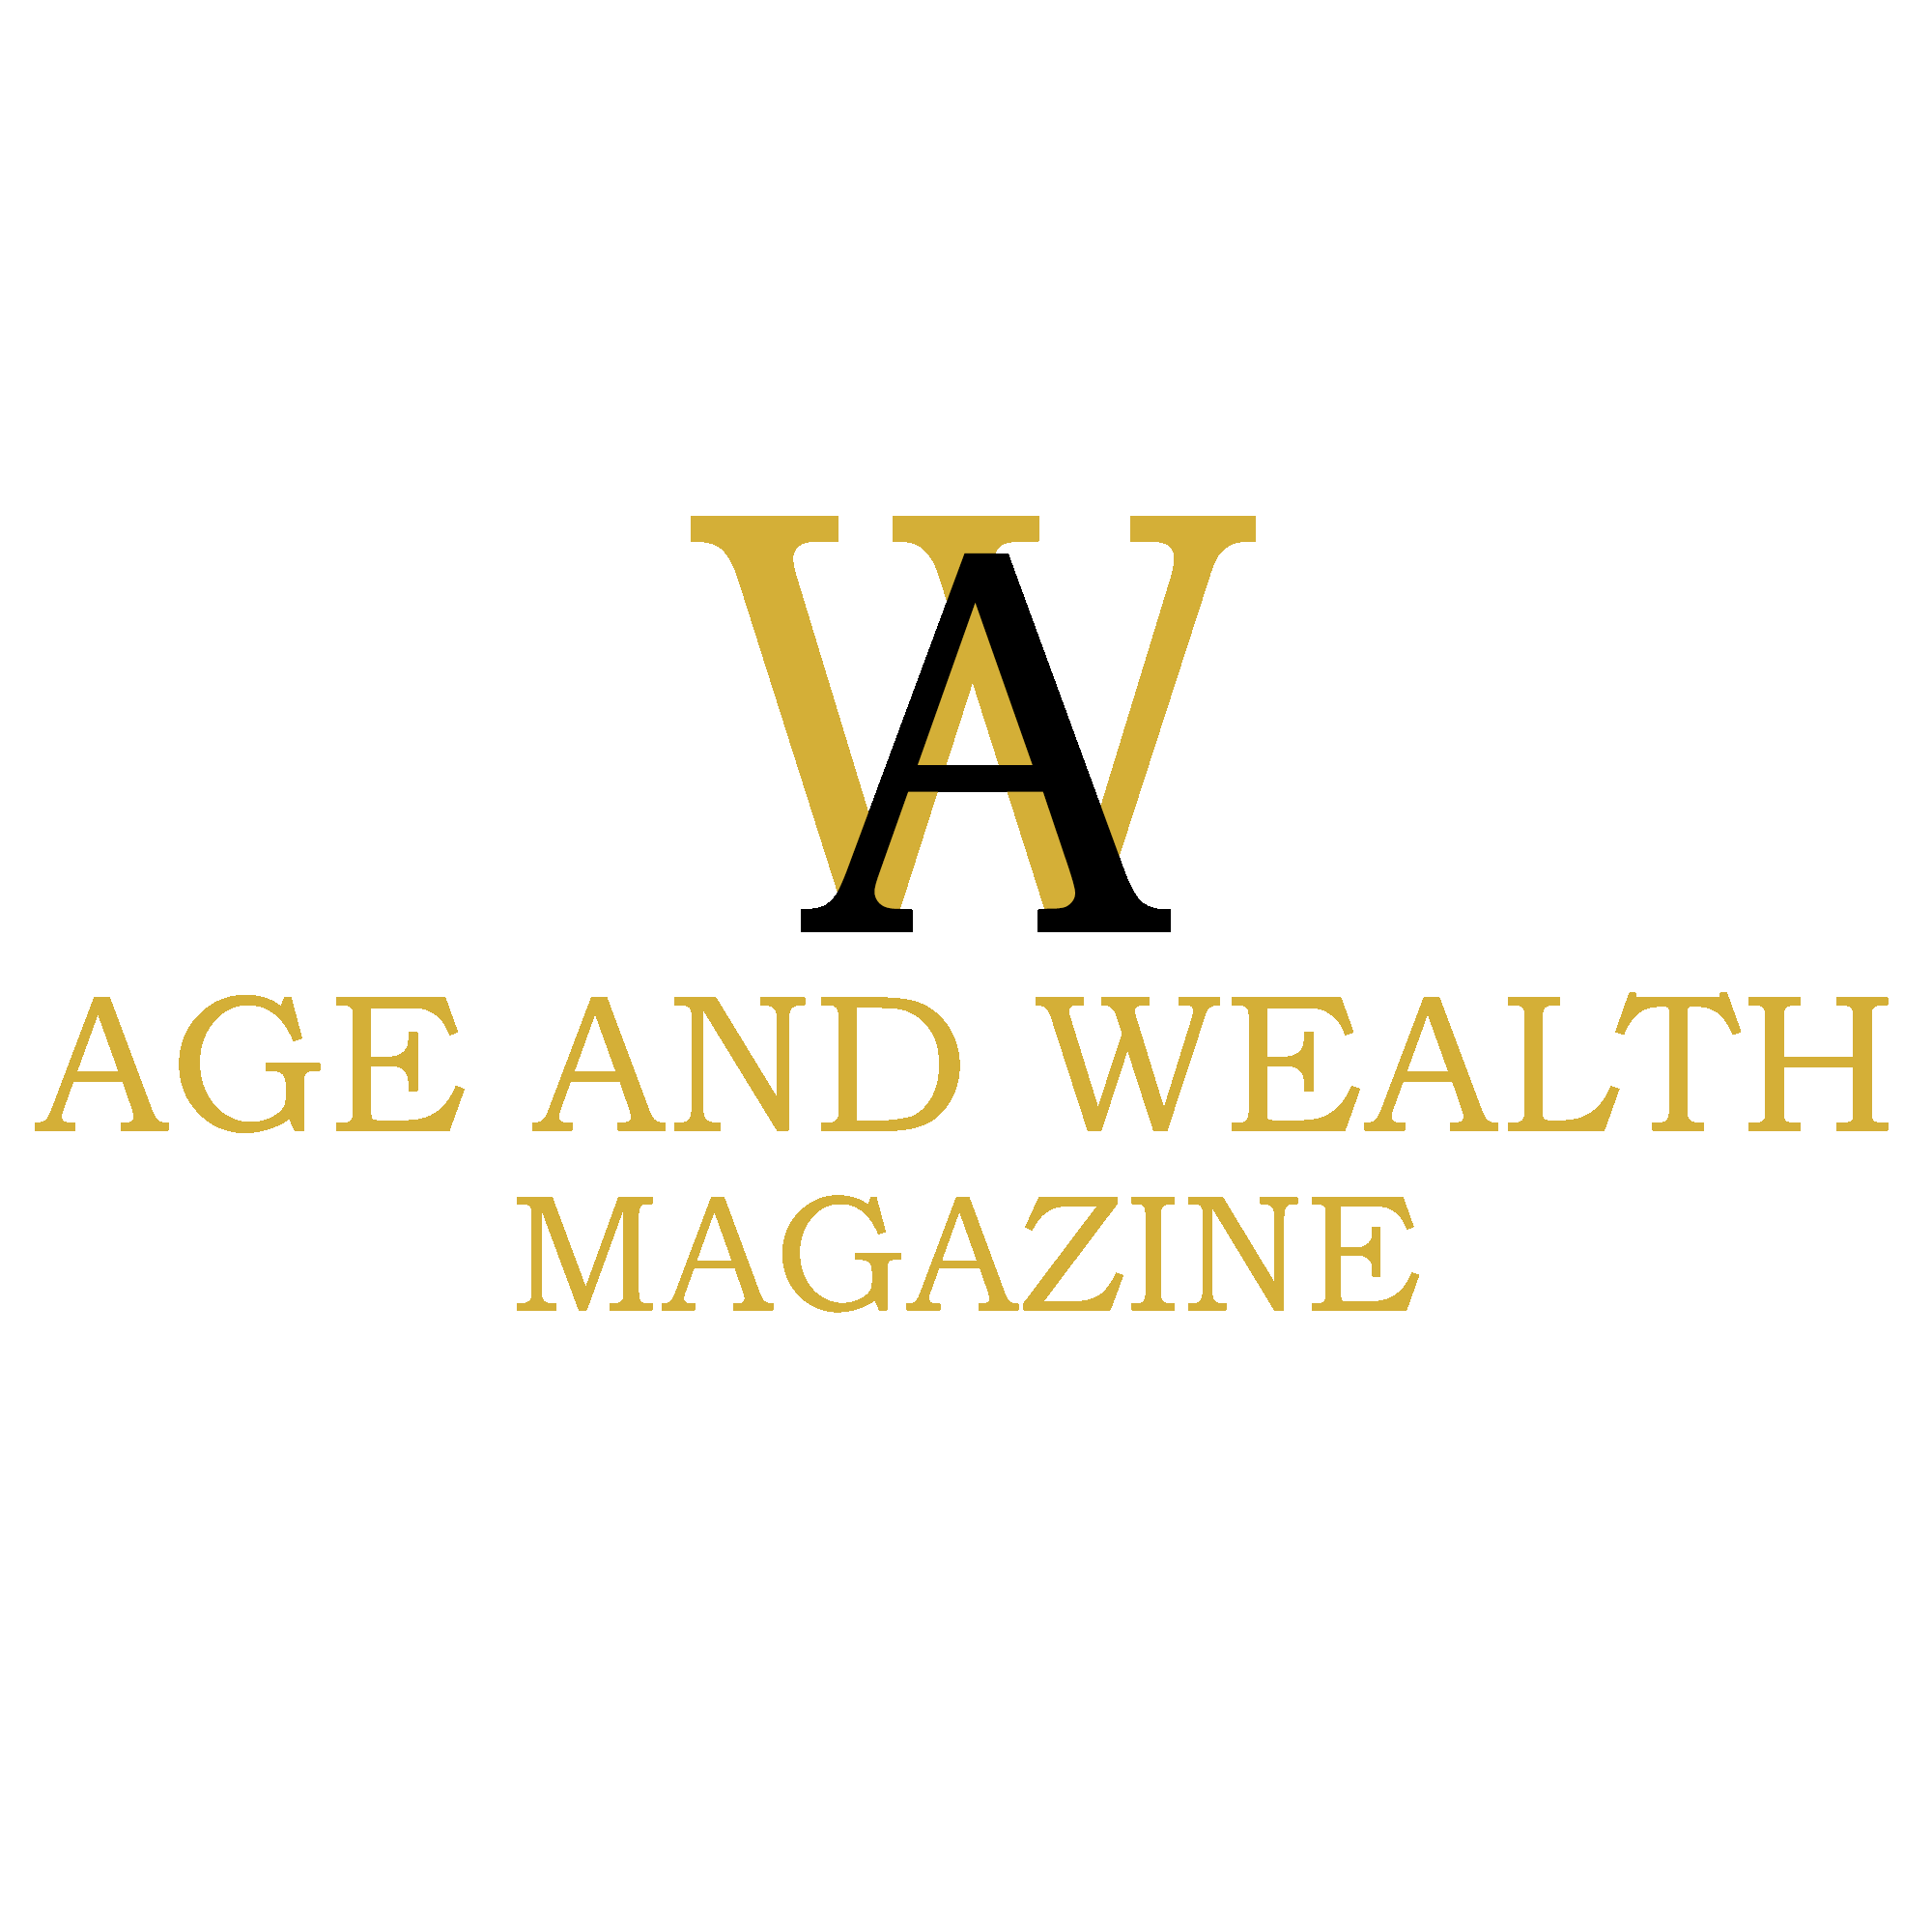 AGE AND WEALTH MAGAZINE